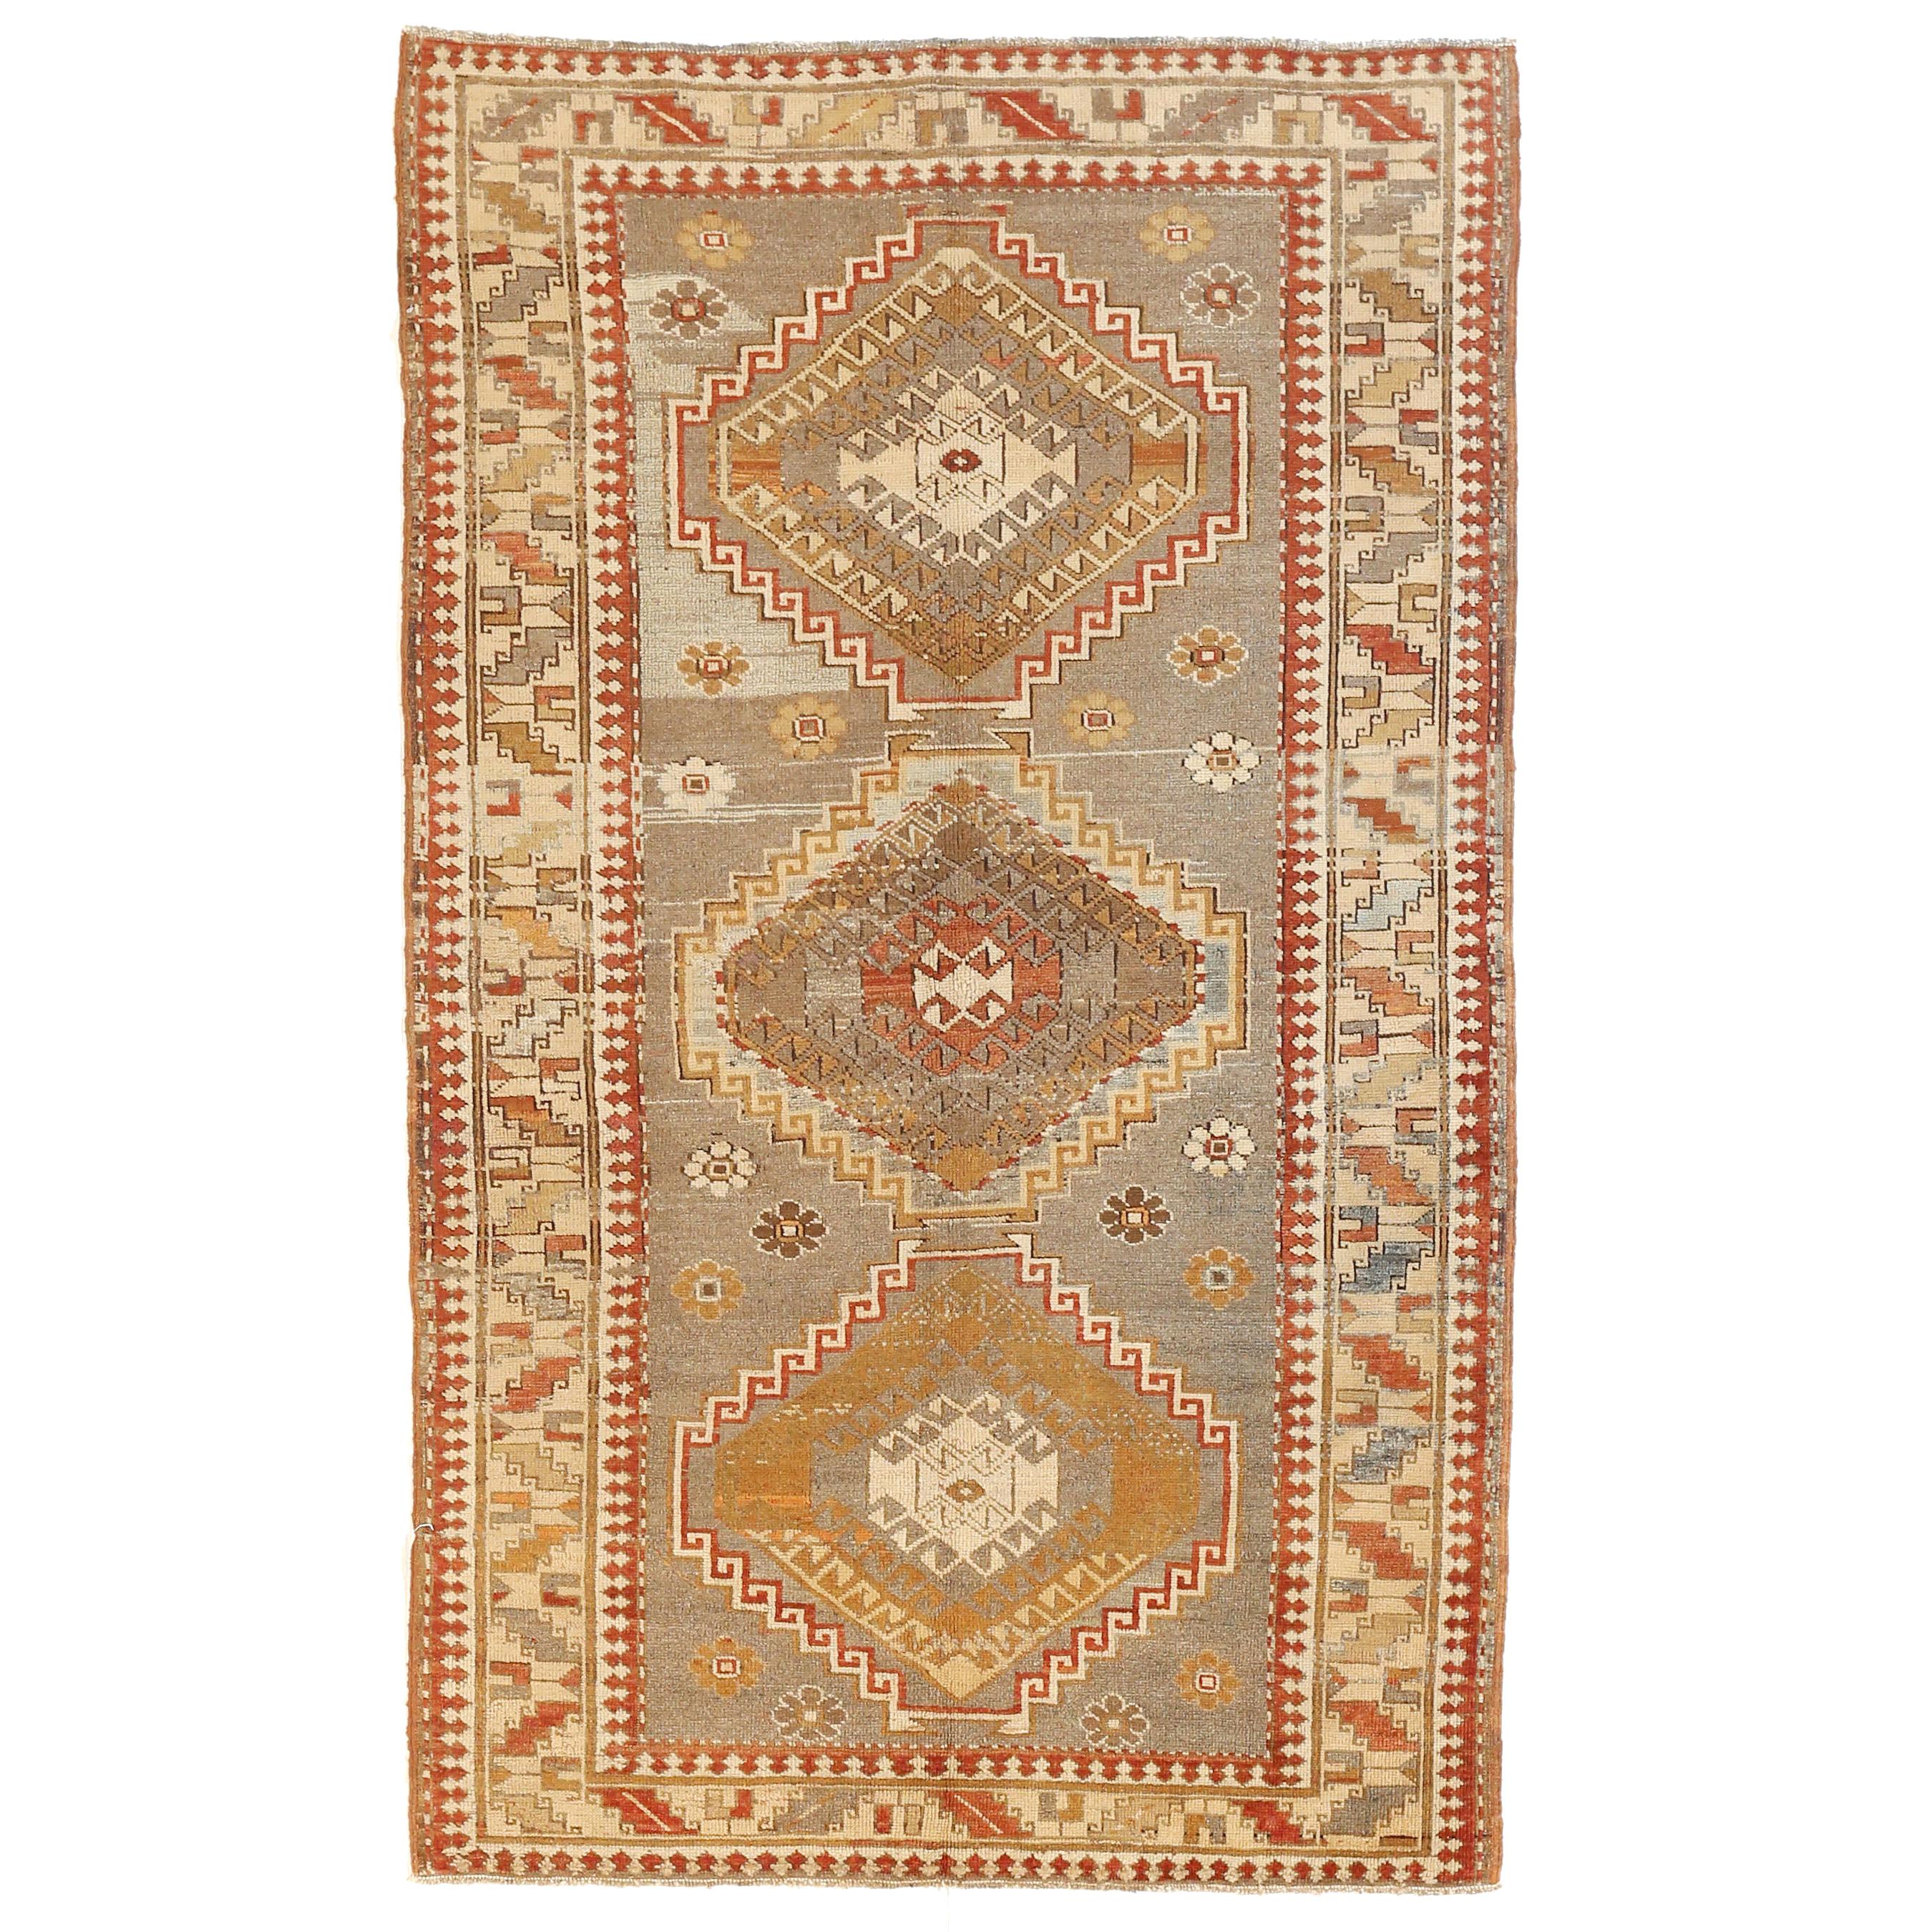 Antique Persian Kazak Style Rug with Brown and Red Tribal Medallions